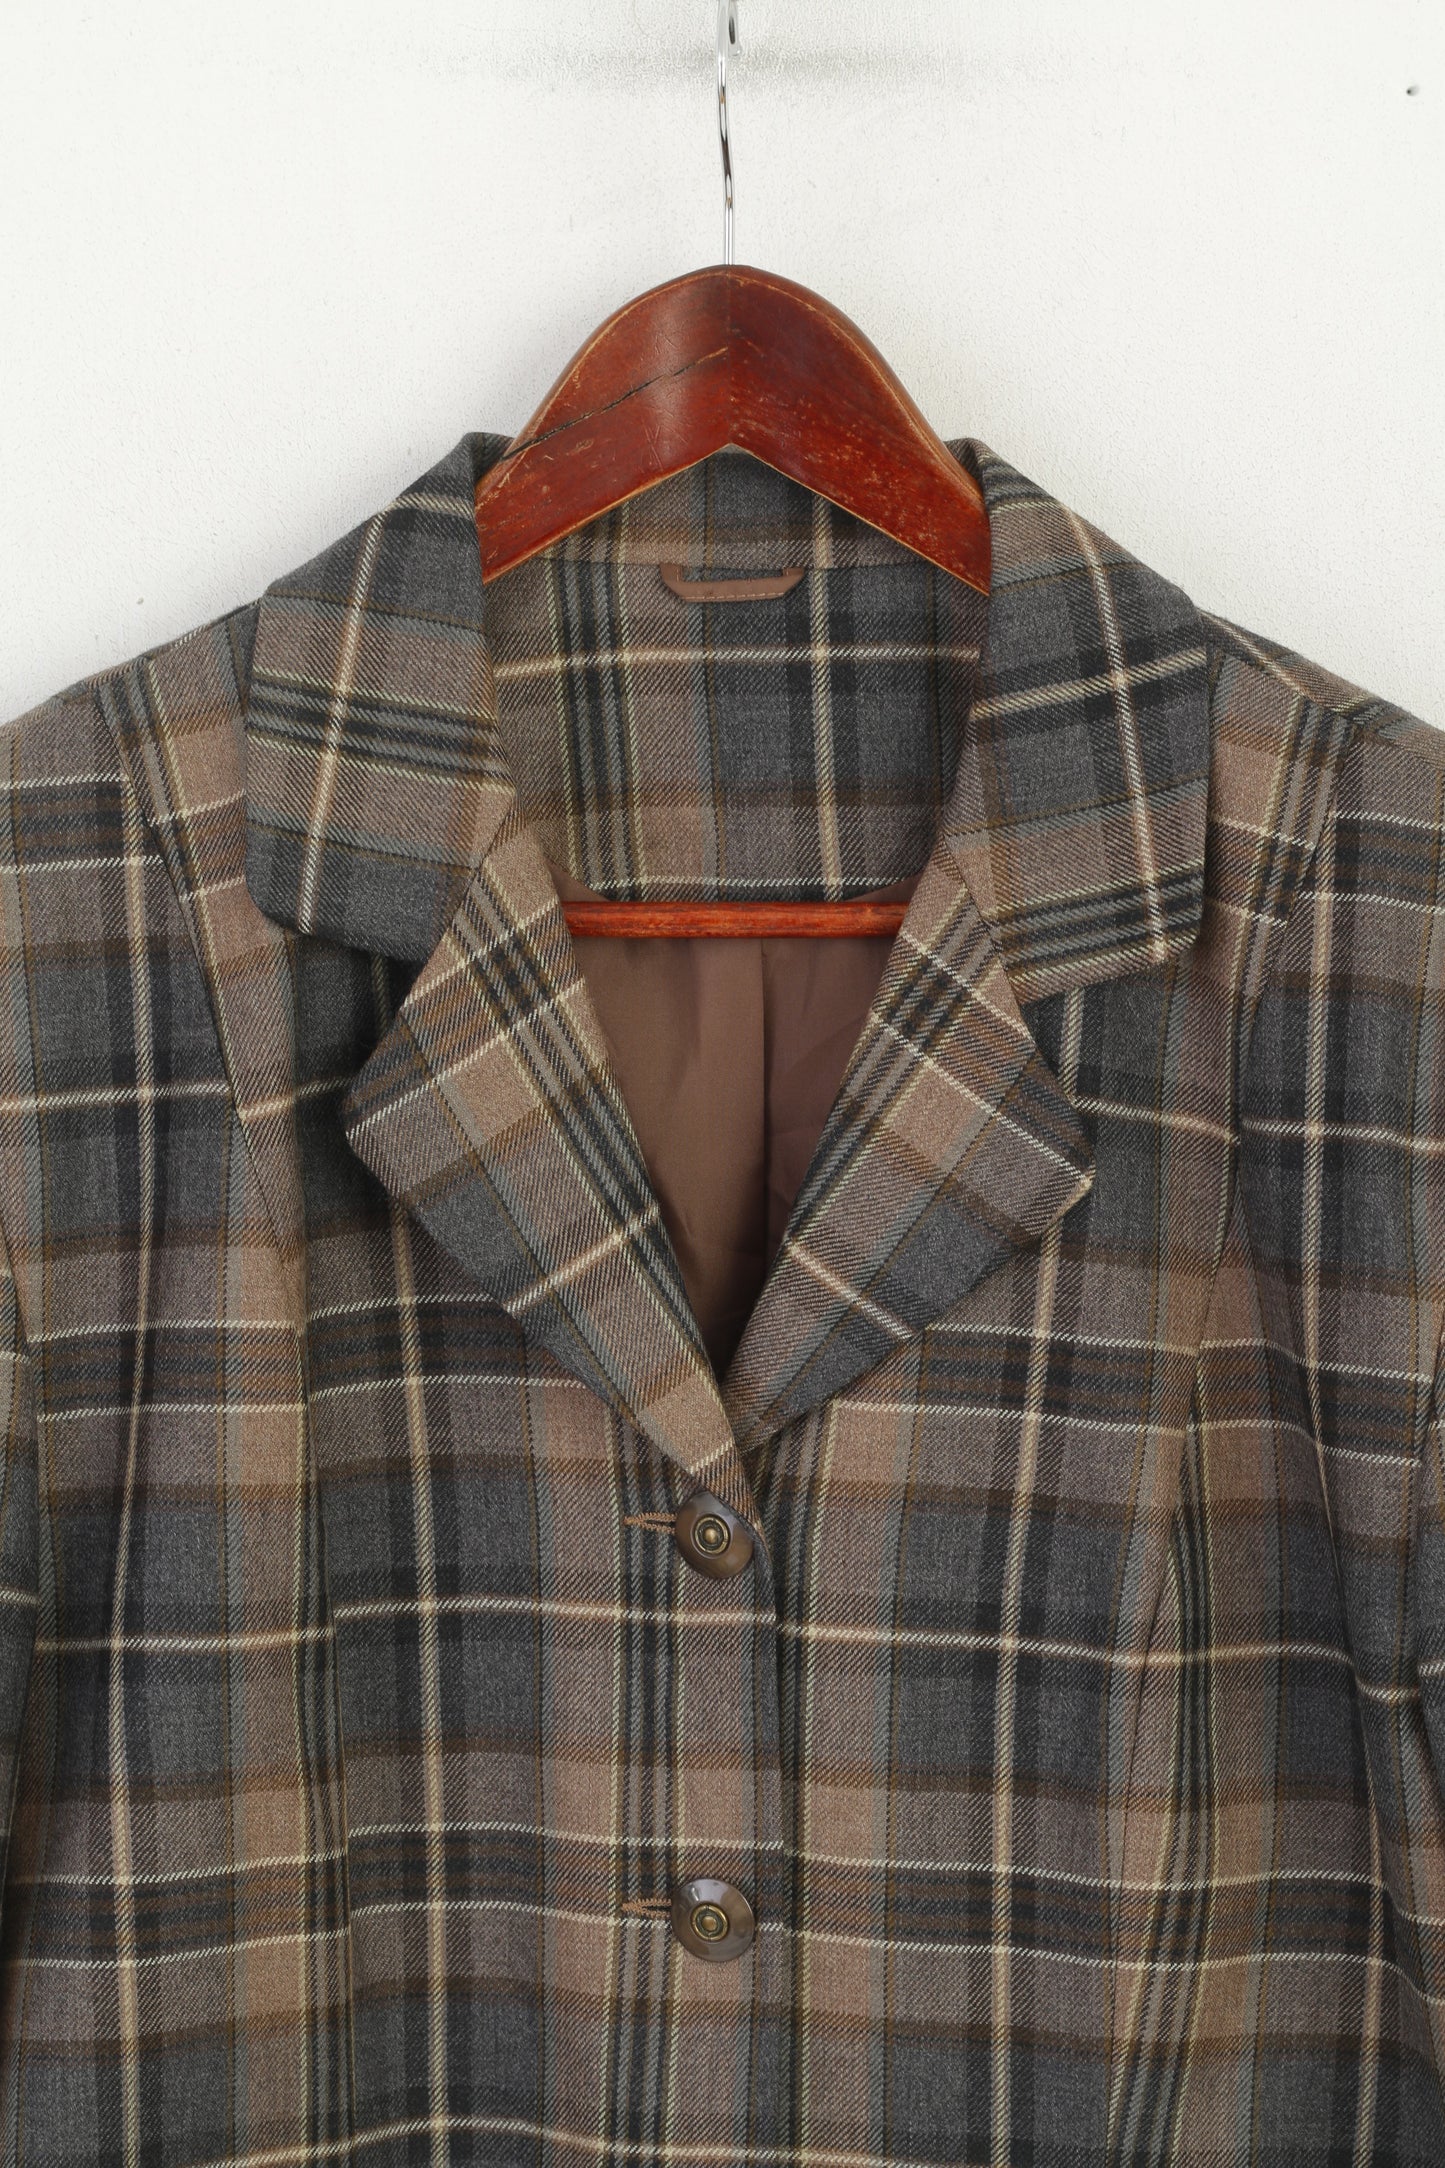 First Avenue Classics Women 18 44 XL Blazer Check Single Breasted Wool Top Jacket